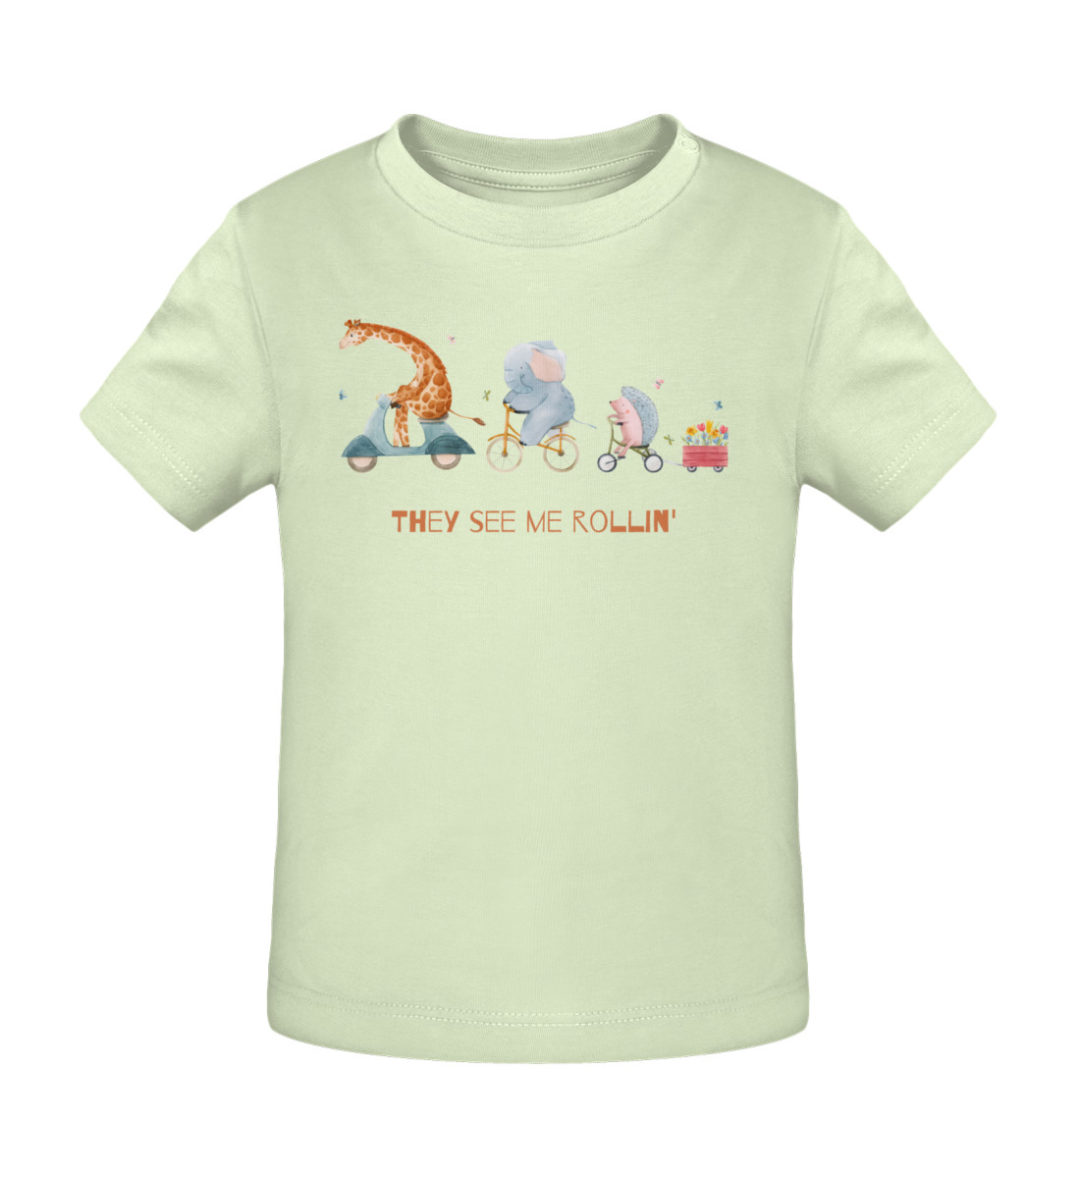 They see me rollin- - Baby Creator T-Shirt ST/ST-7105